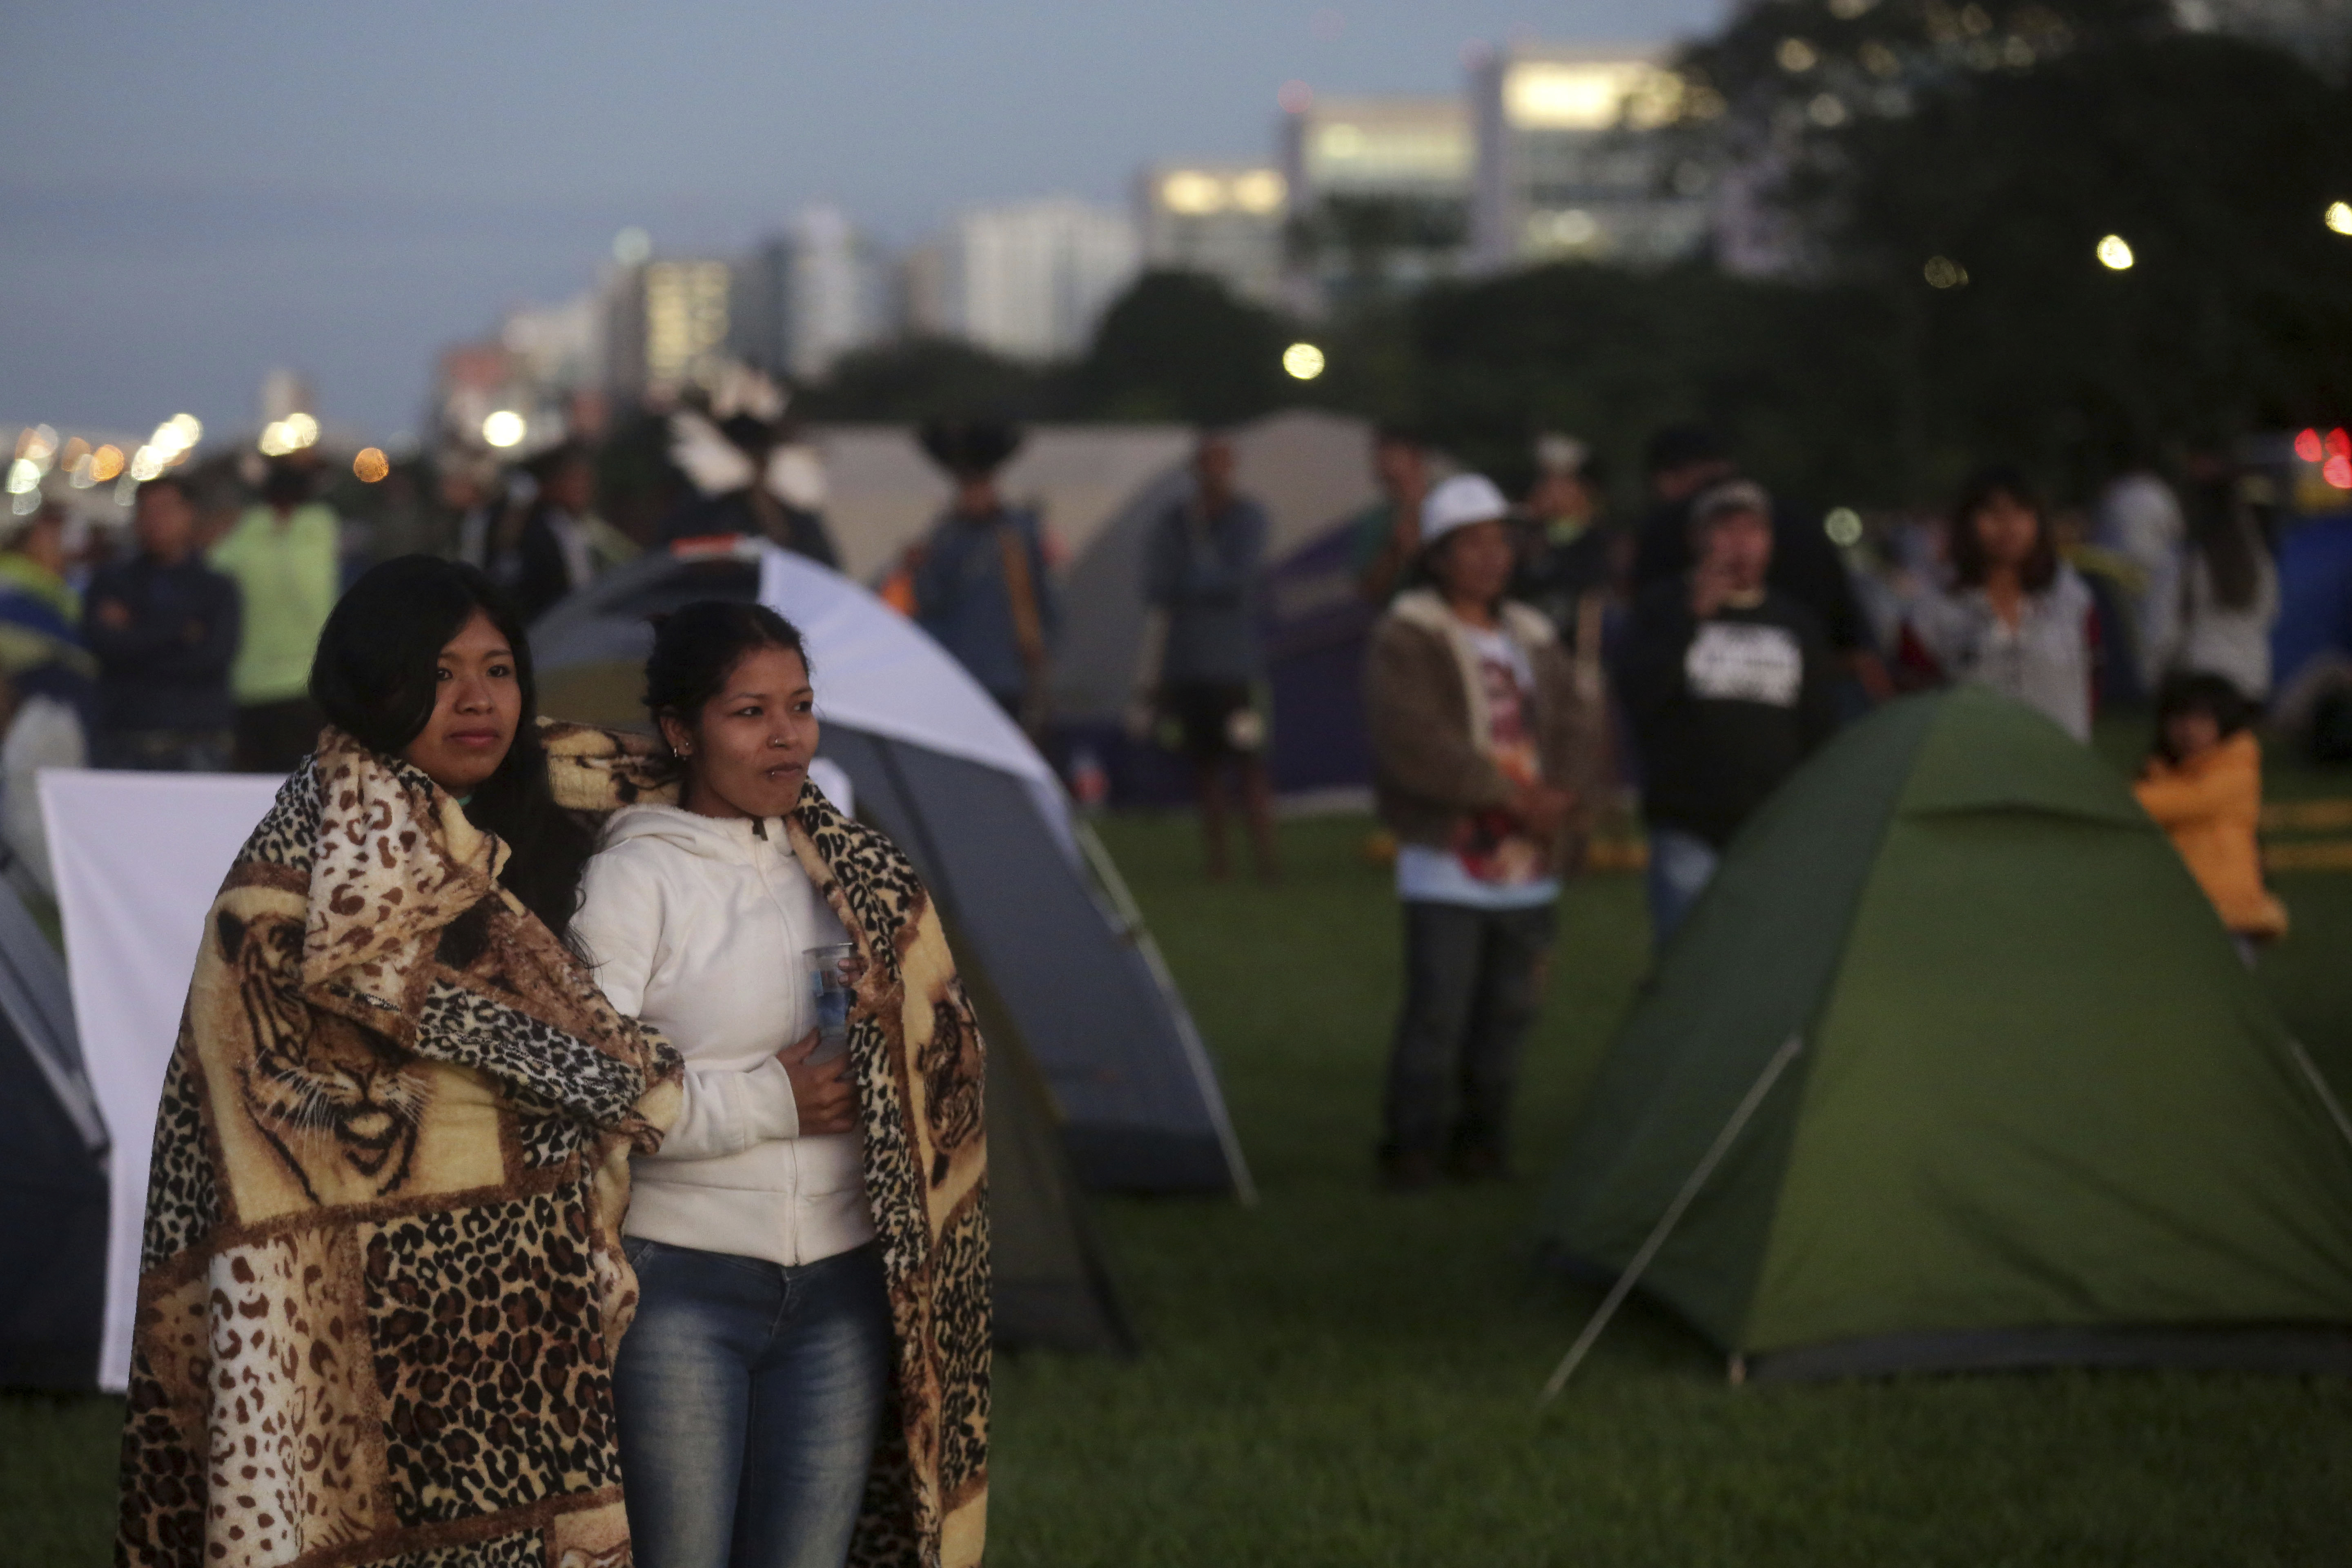 Indigenous peoples rise at sunset during an annual three-day campout protest known as the Free Land Encampment, in Brasilia, Brazil, Wednesday, April 24, 2019. The event begins amid animosity between Brazil’s indigenous groups and the new government of far-right President Jair Bolsonaro. (AP Photo/Eraldo Peres)